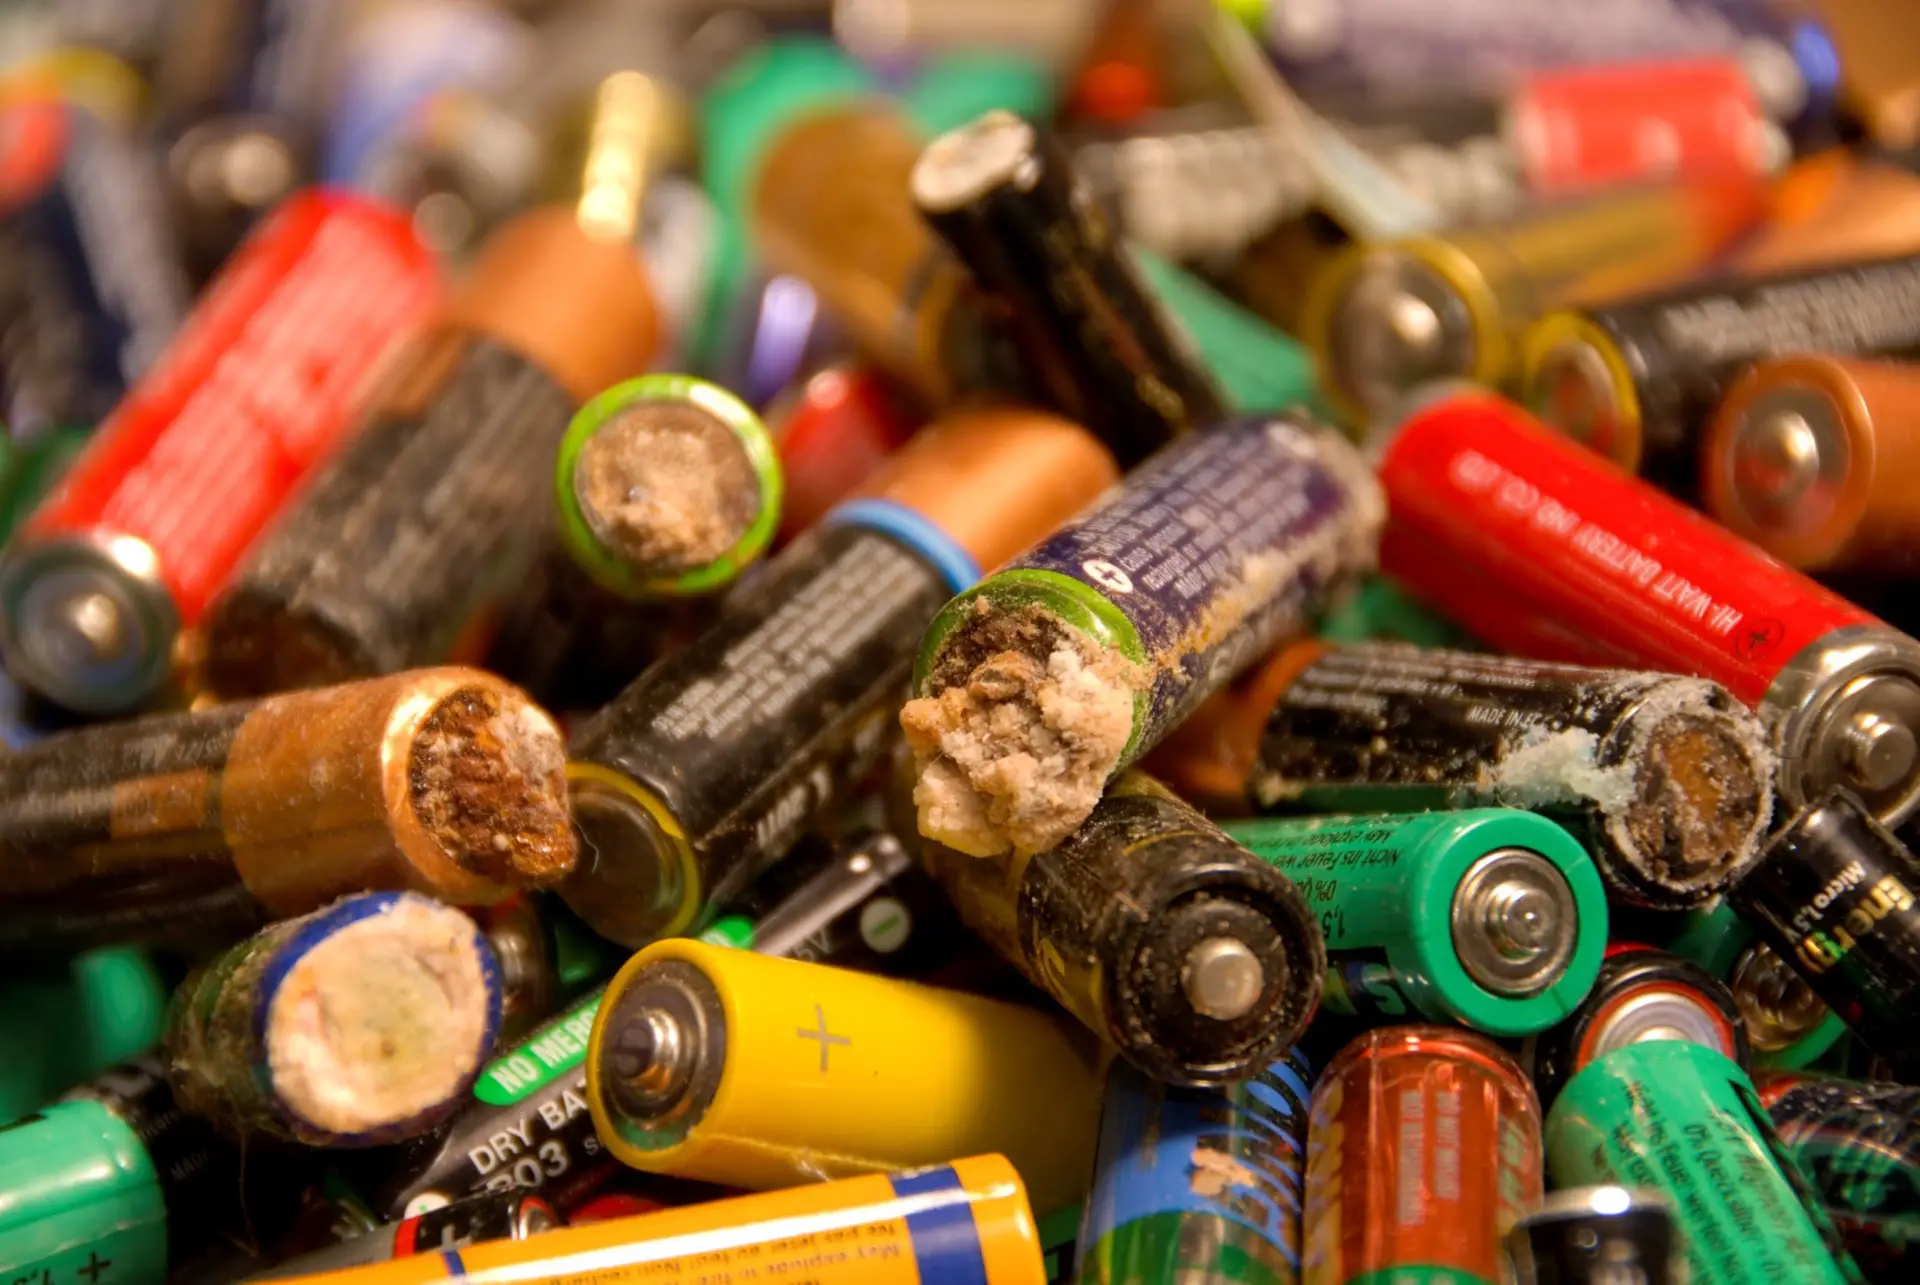 Are Rechargeable Batteries Eco-Friendly? 9 Important Facts